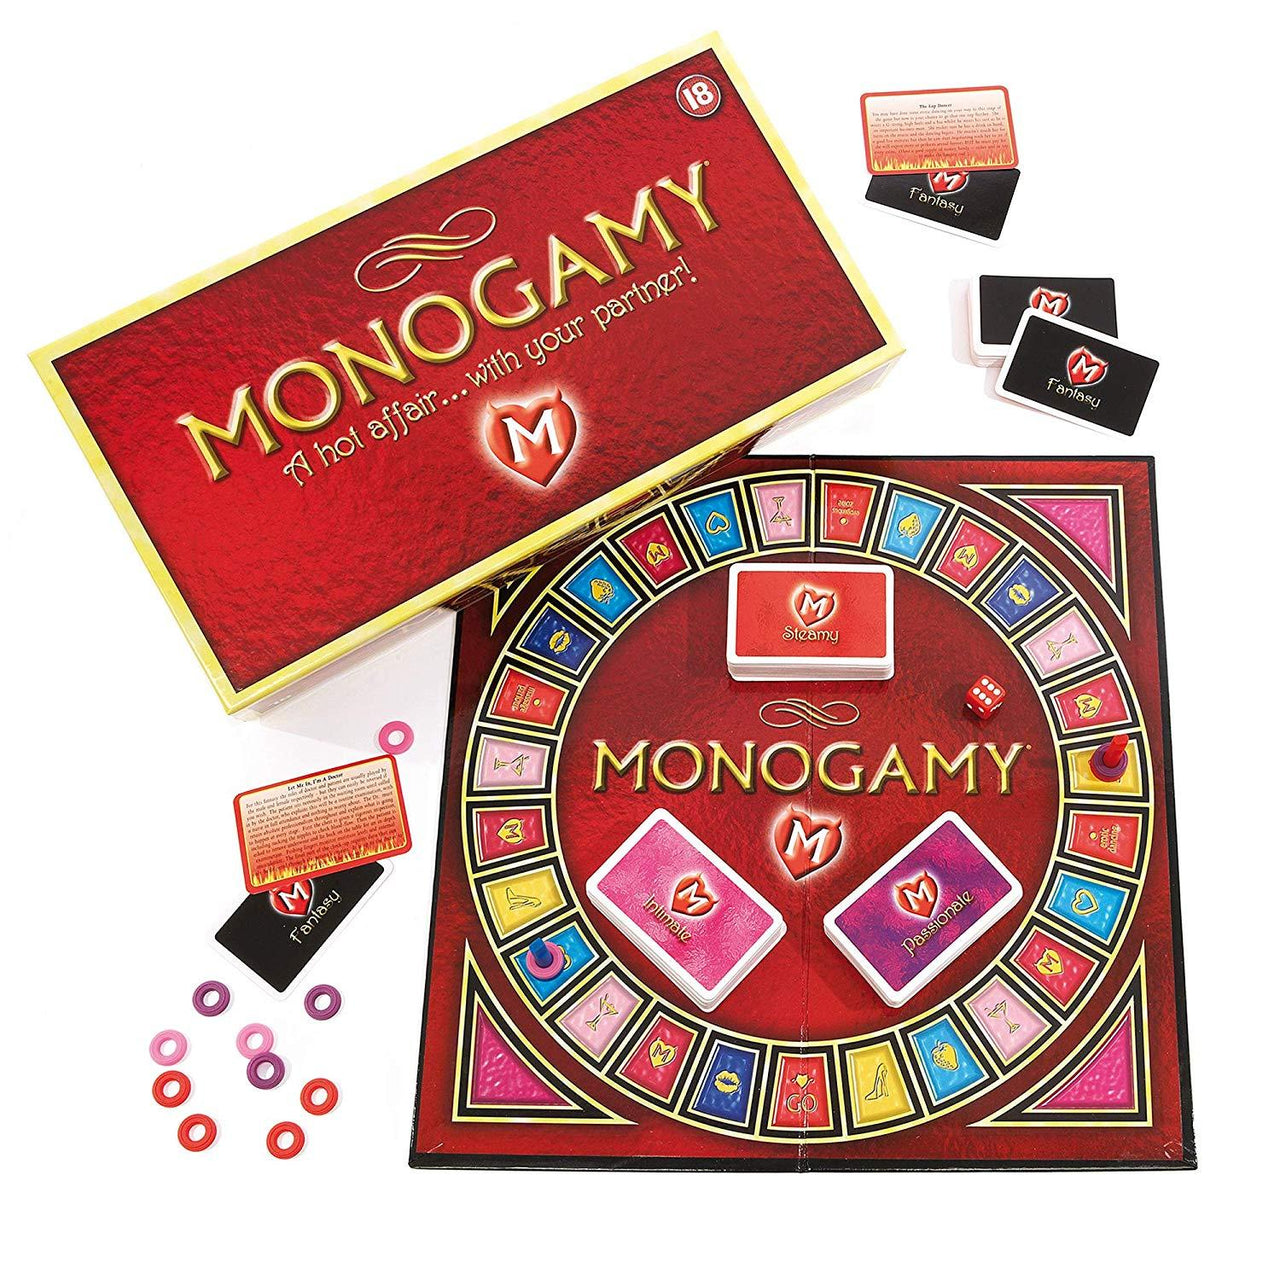 Monogamy: A Hot Affair... With Your Partner